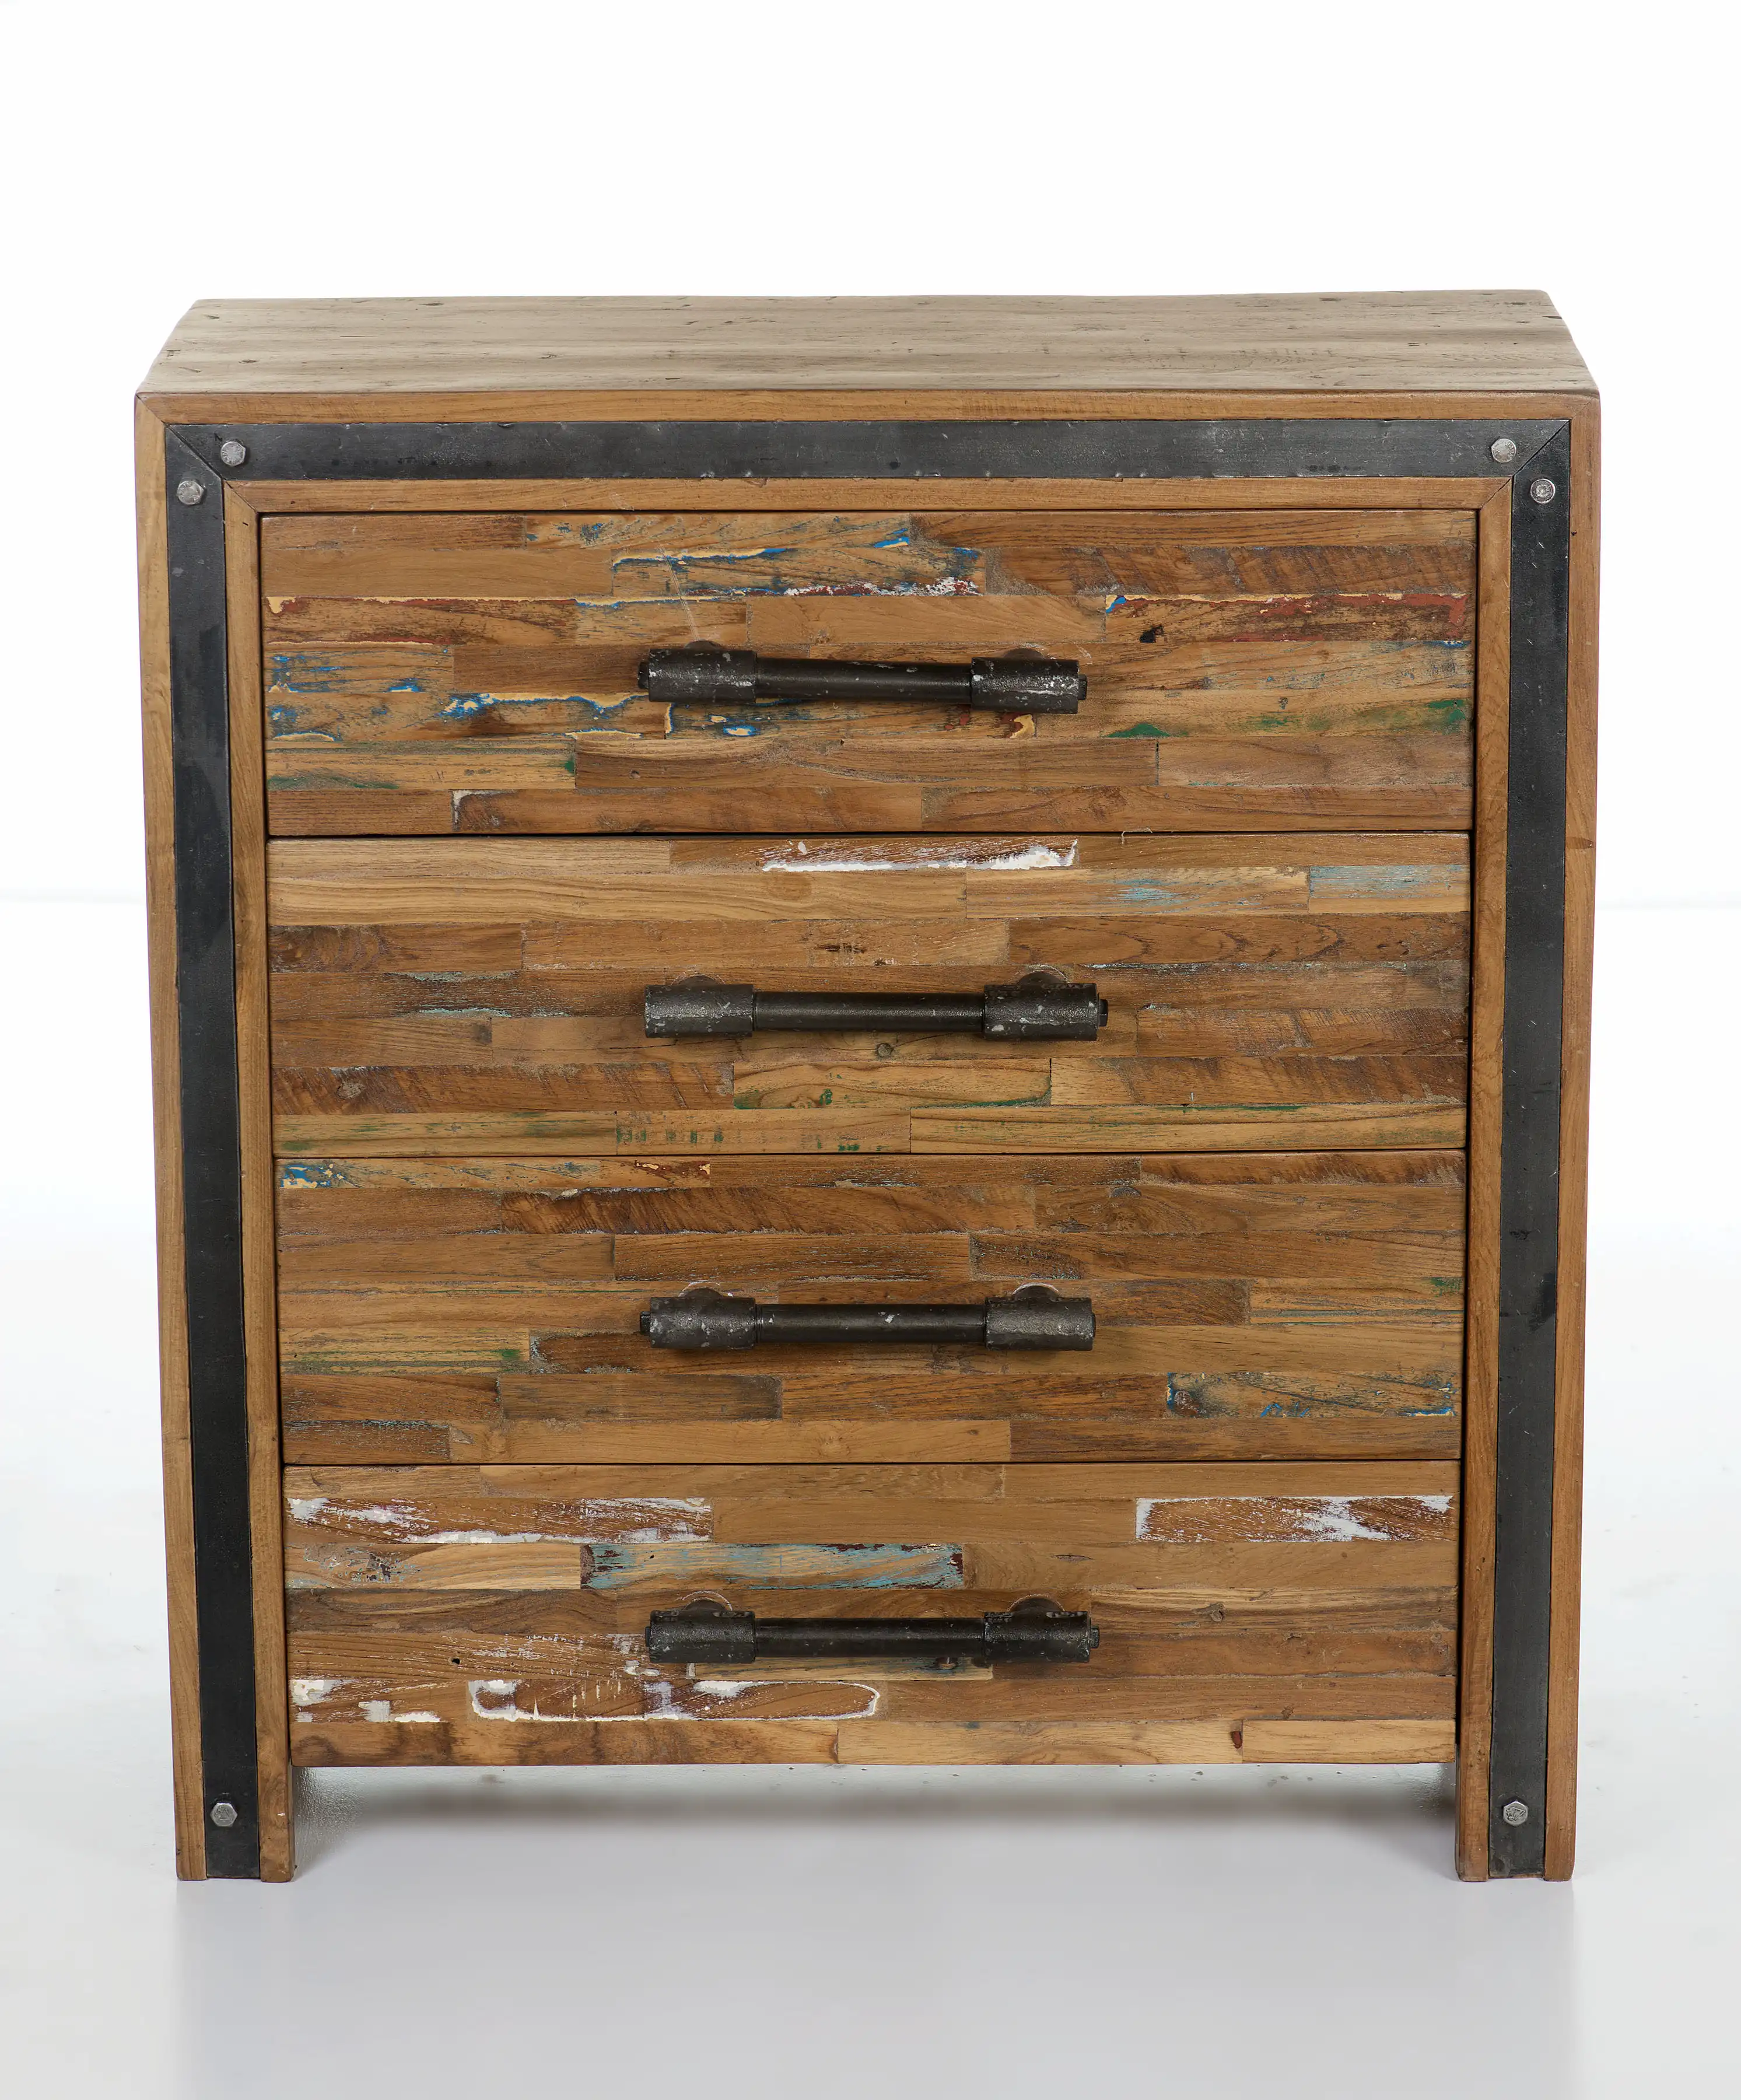 Reclaimed Wood Cabinet with 3 Drawers - popular handicrafts